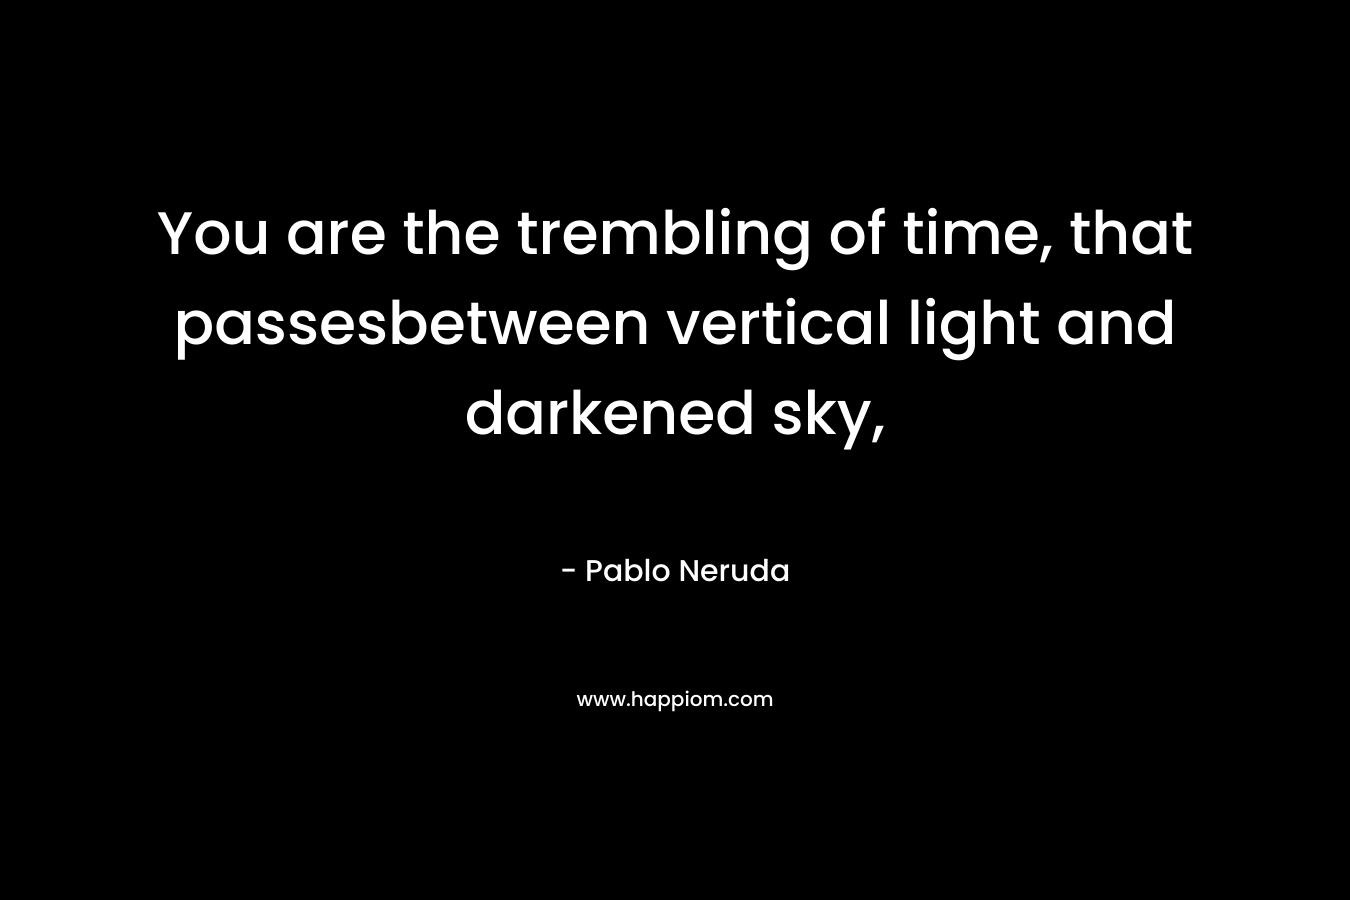 You are the trembling of time, that passesbetween vertical light and darkened sky, – Pablo Neruda